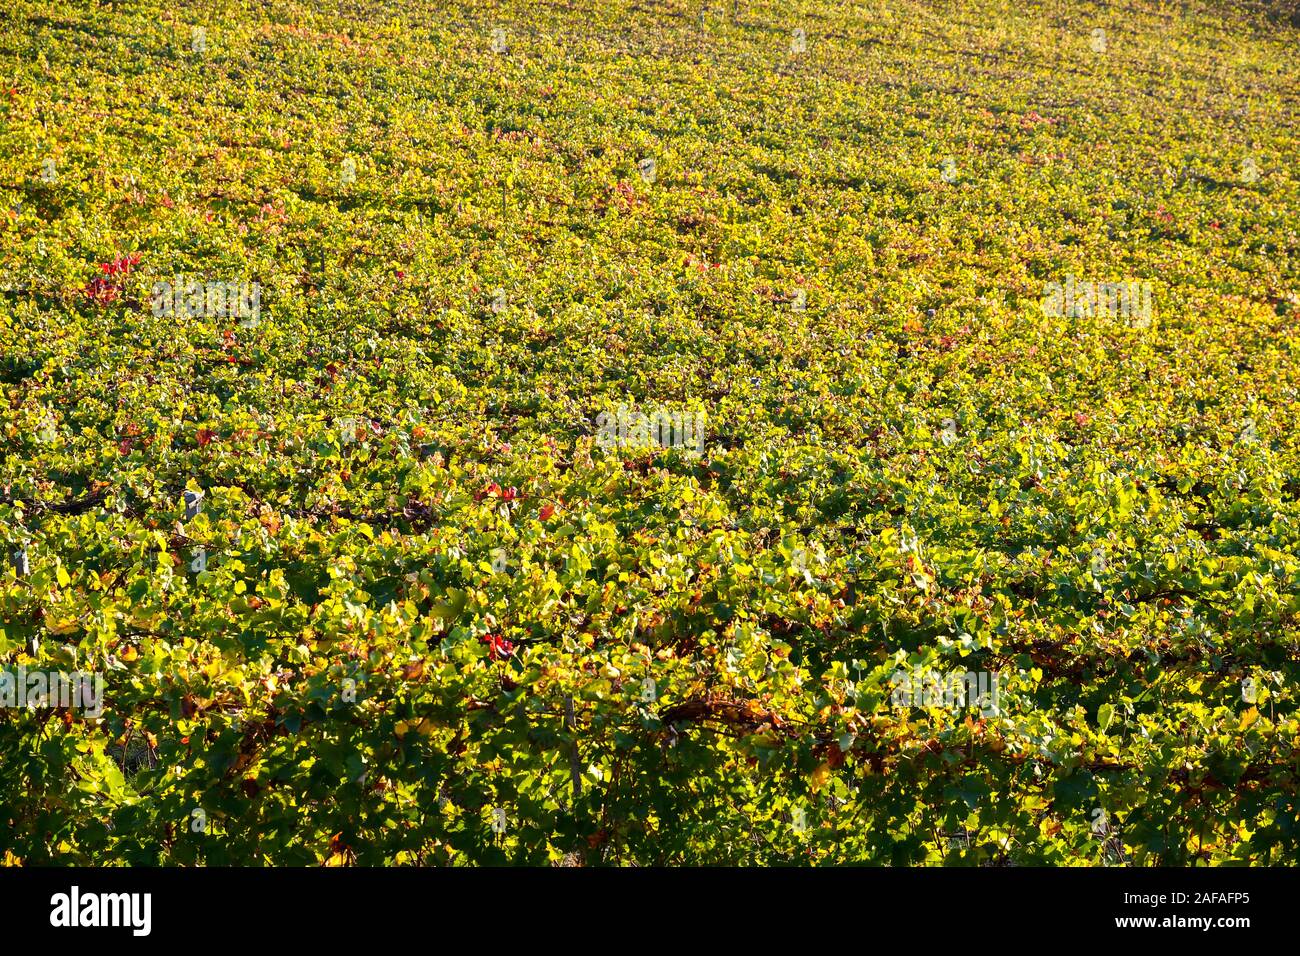 High angle view of a vineyard with rows of vines in autumn, Langhe hills, Unesco World Heritage Site, Barbaresco, Cuneo province, Piedmont, Italy Stock Photo